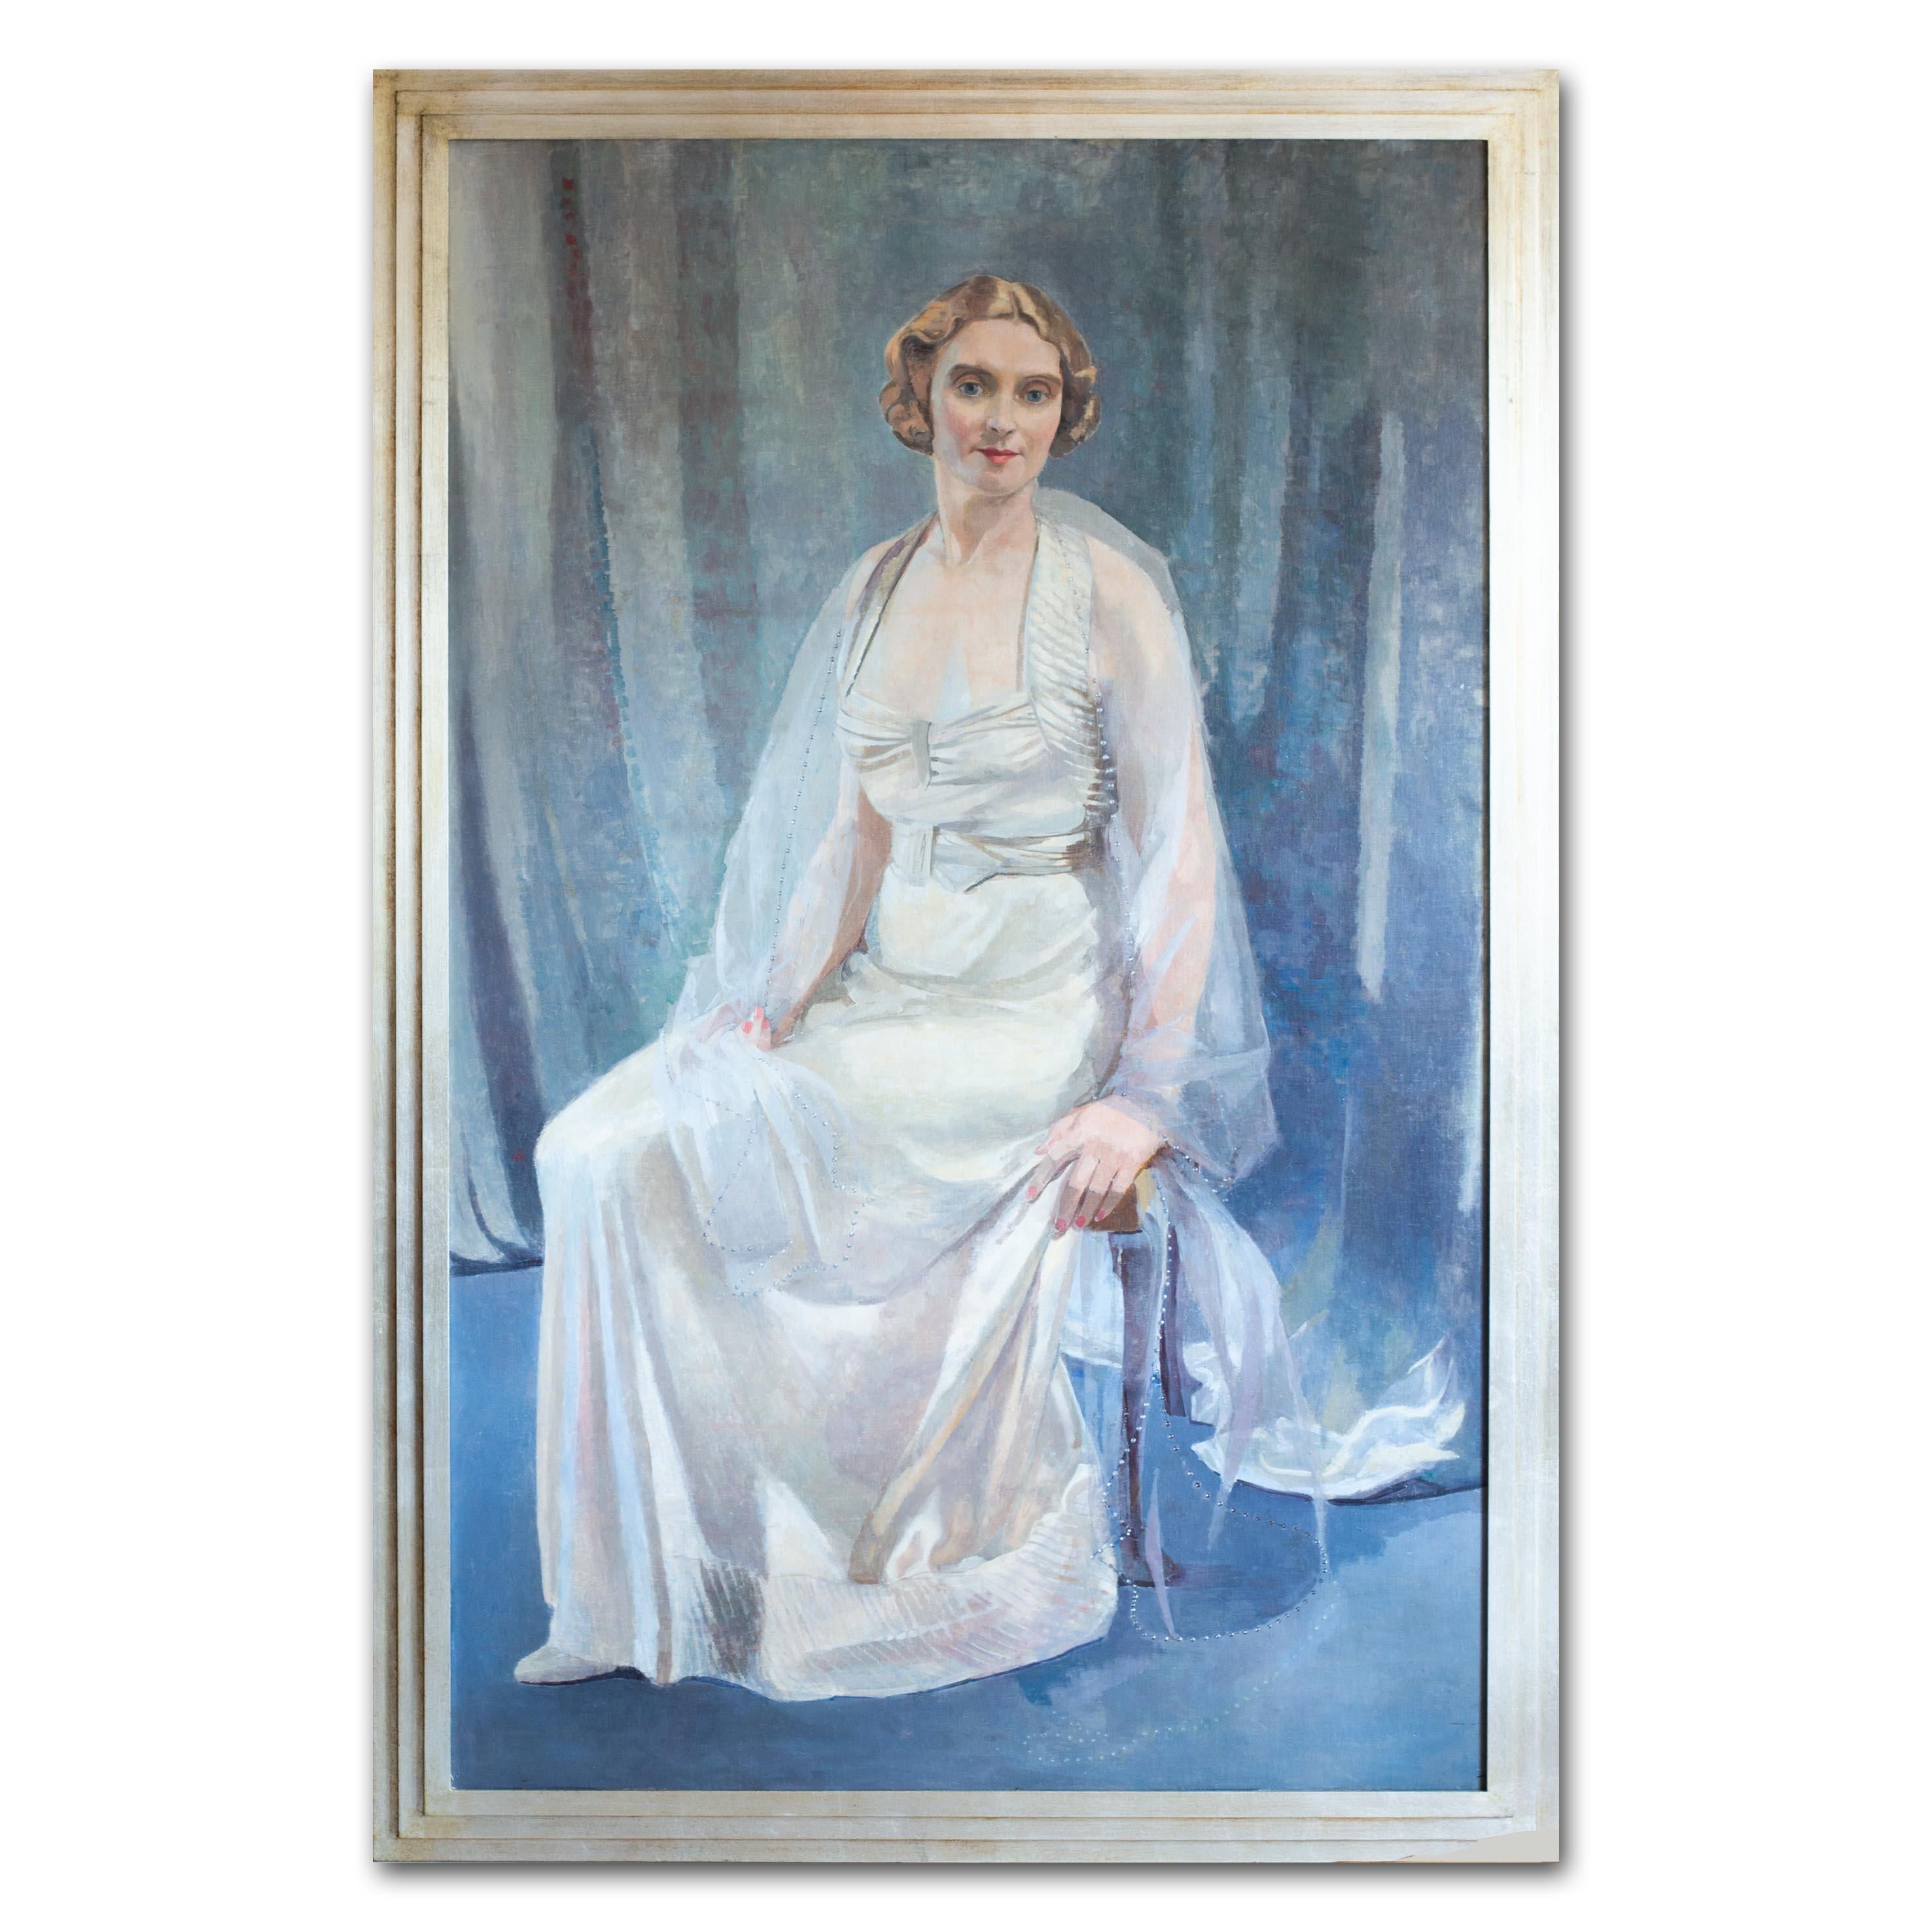 20th Century British portrait of a society lady thought to be Dame Anna Neagle - Academic Painting by Unknown